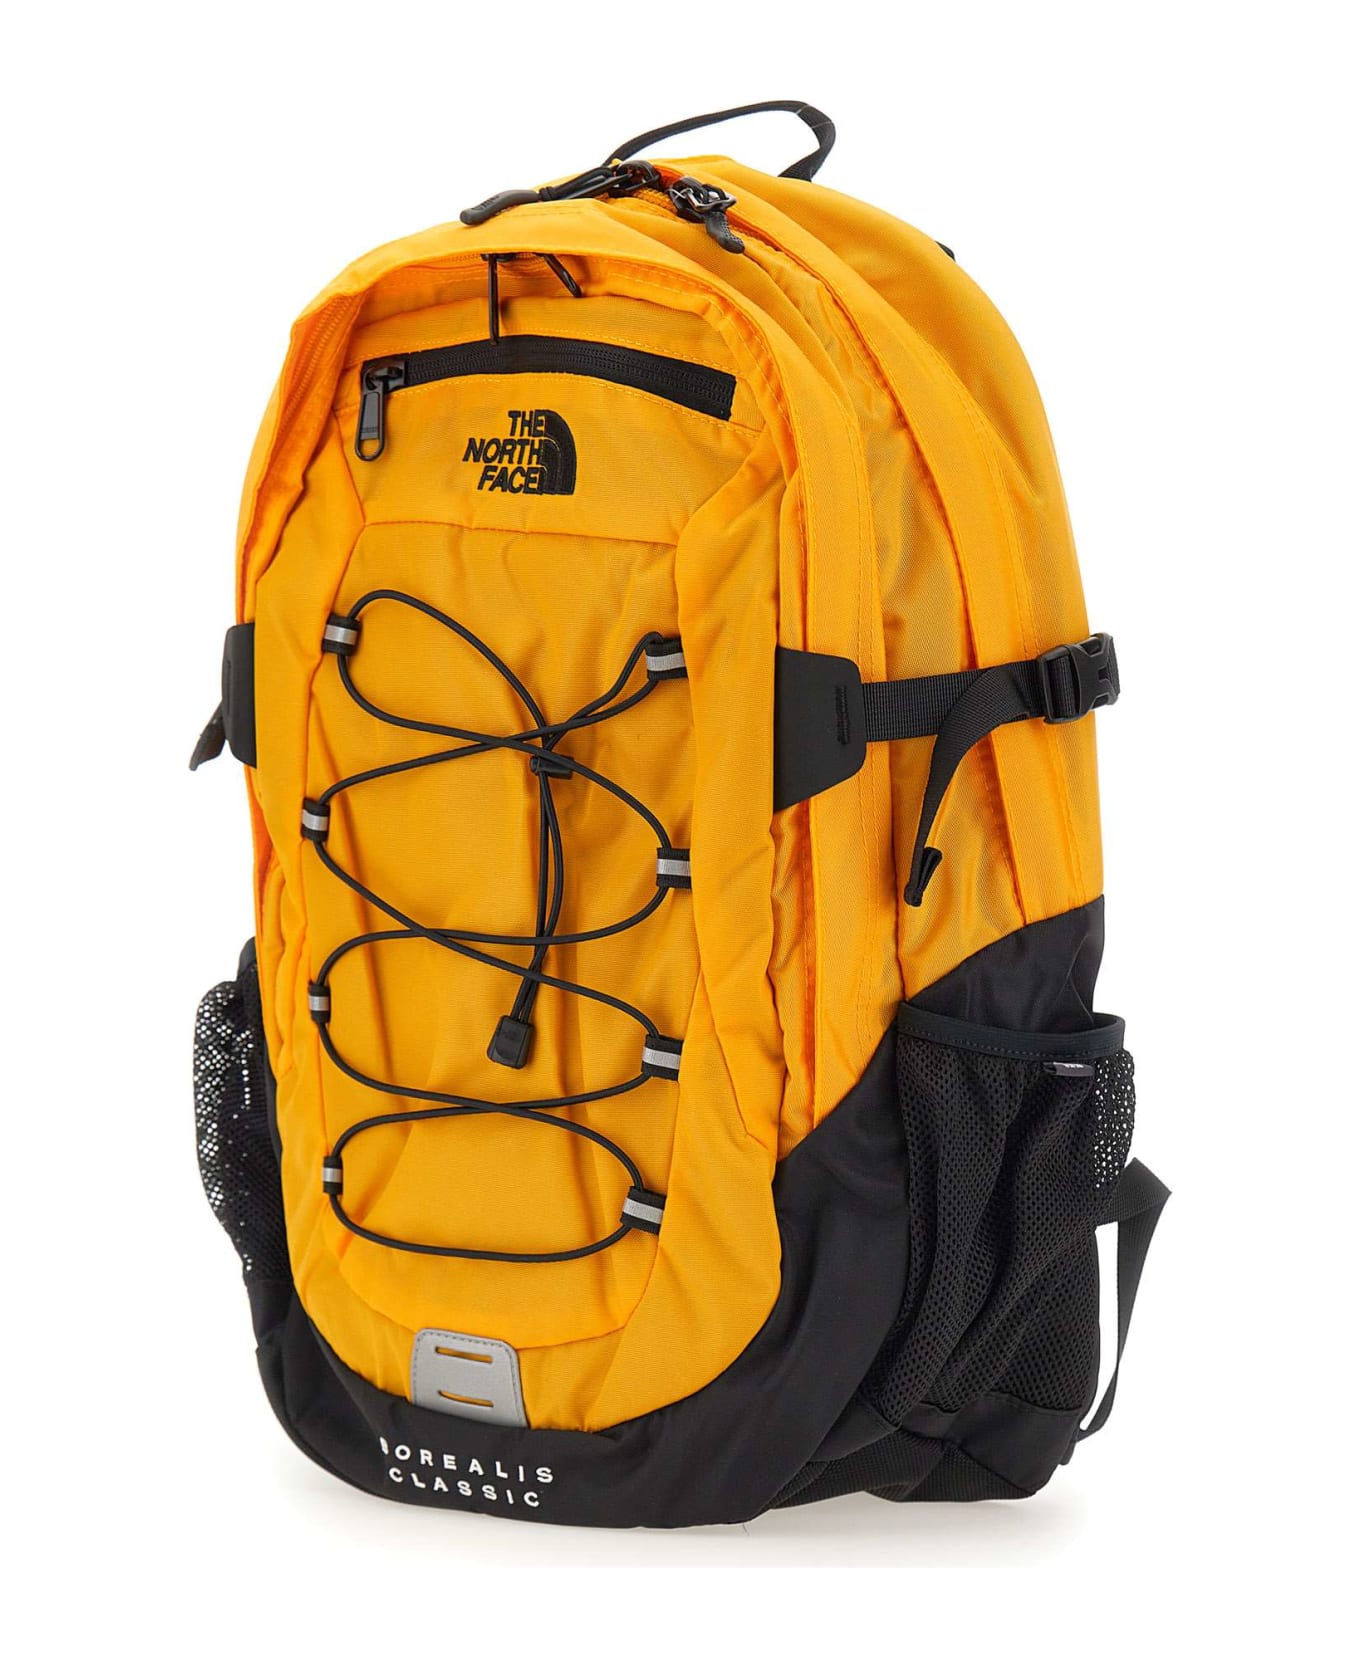 The North Face "borealis Classic" Backpack - YELLOW